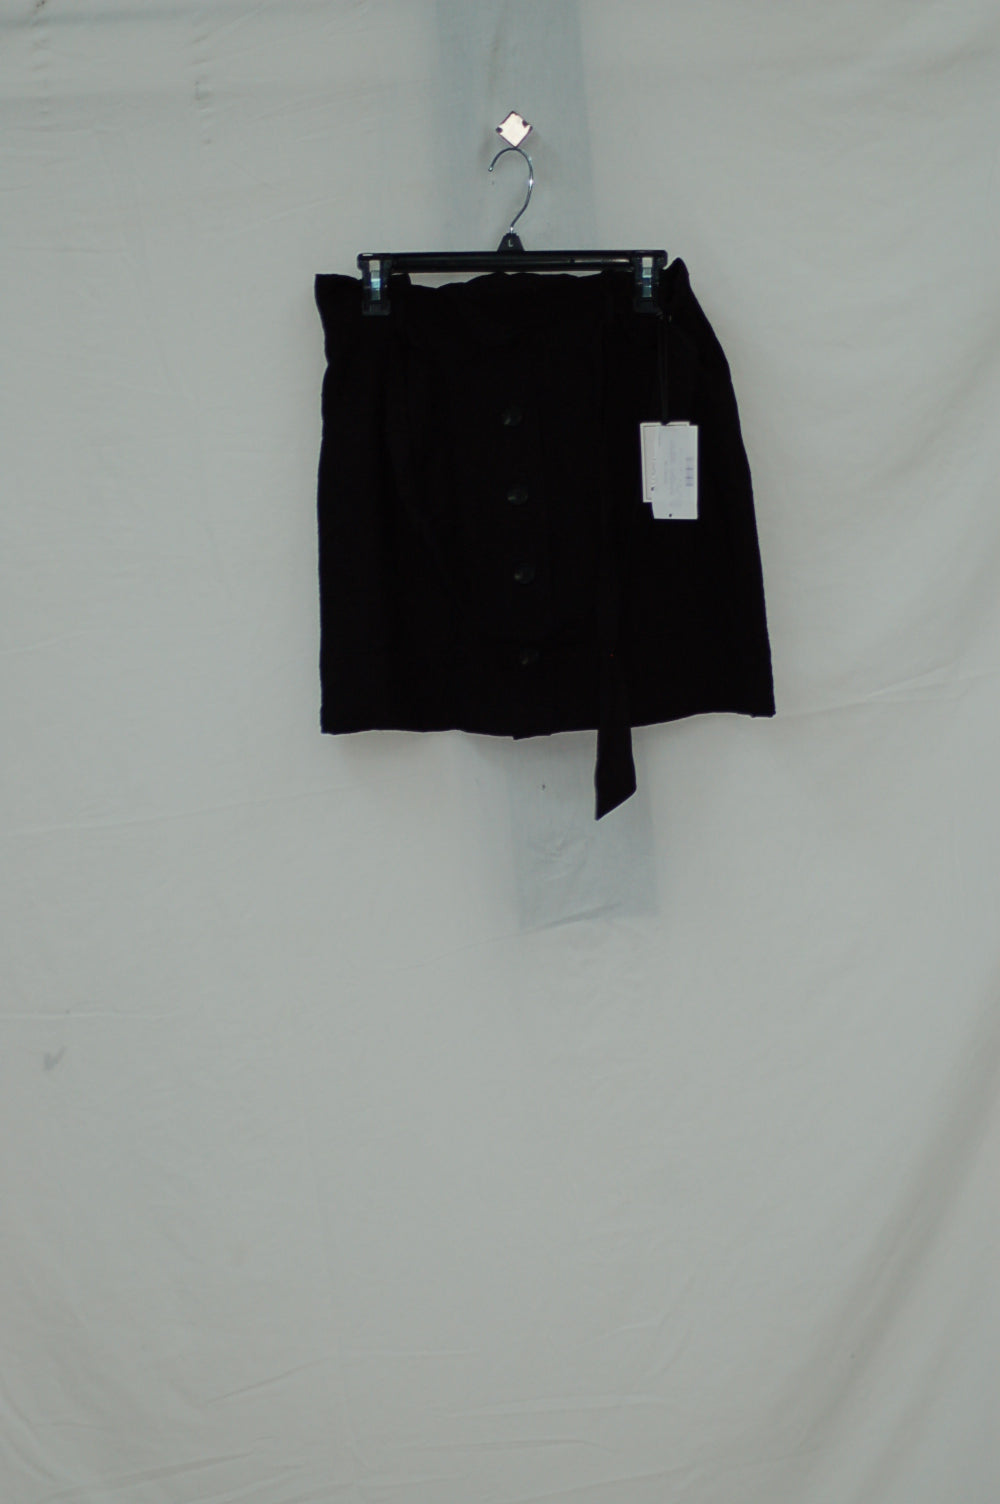 1. STATE WOMEN'S MINI SKIRT, BLACK, SIZE 8 - NEW WITHOUT TAG 10886